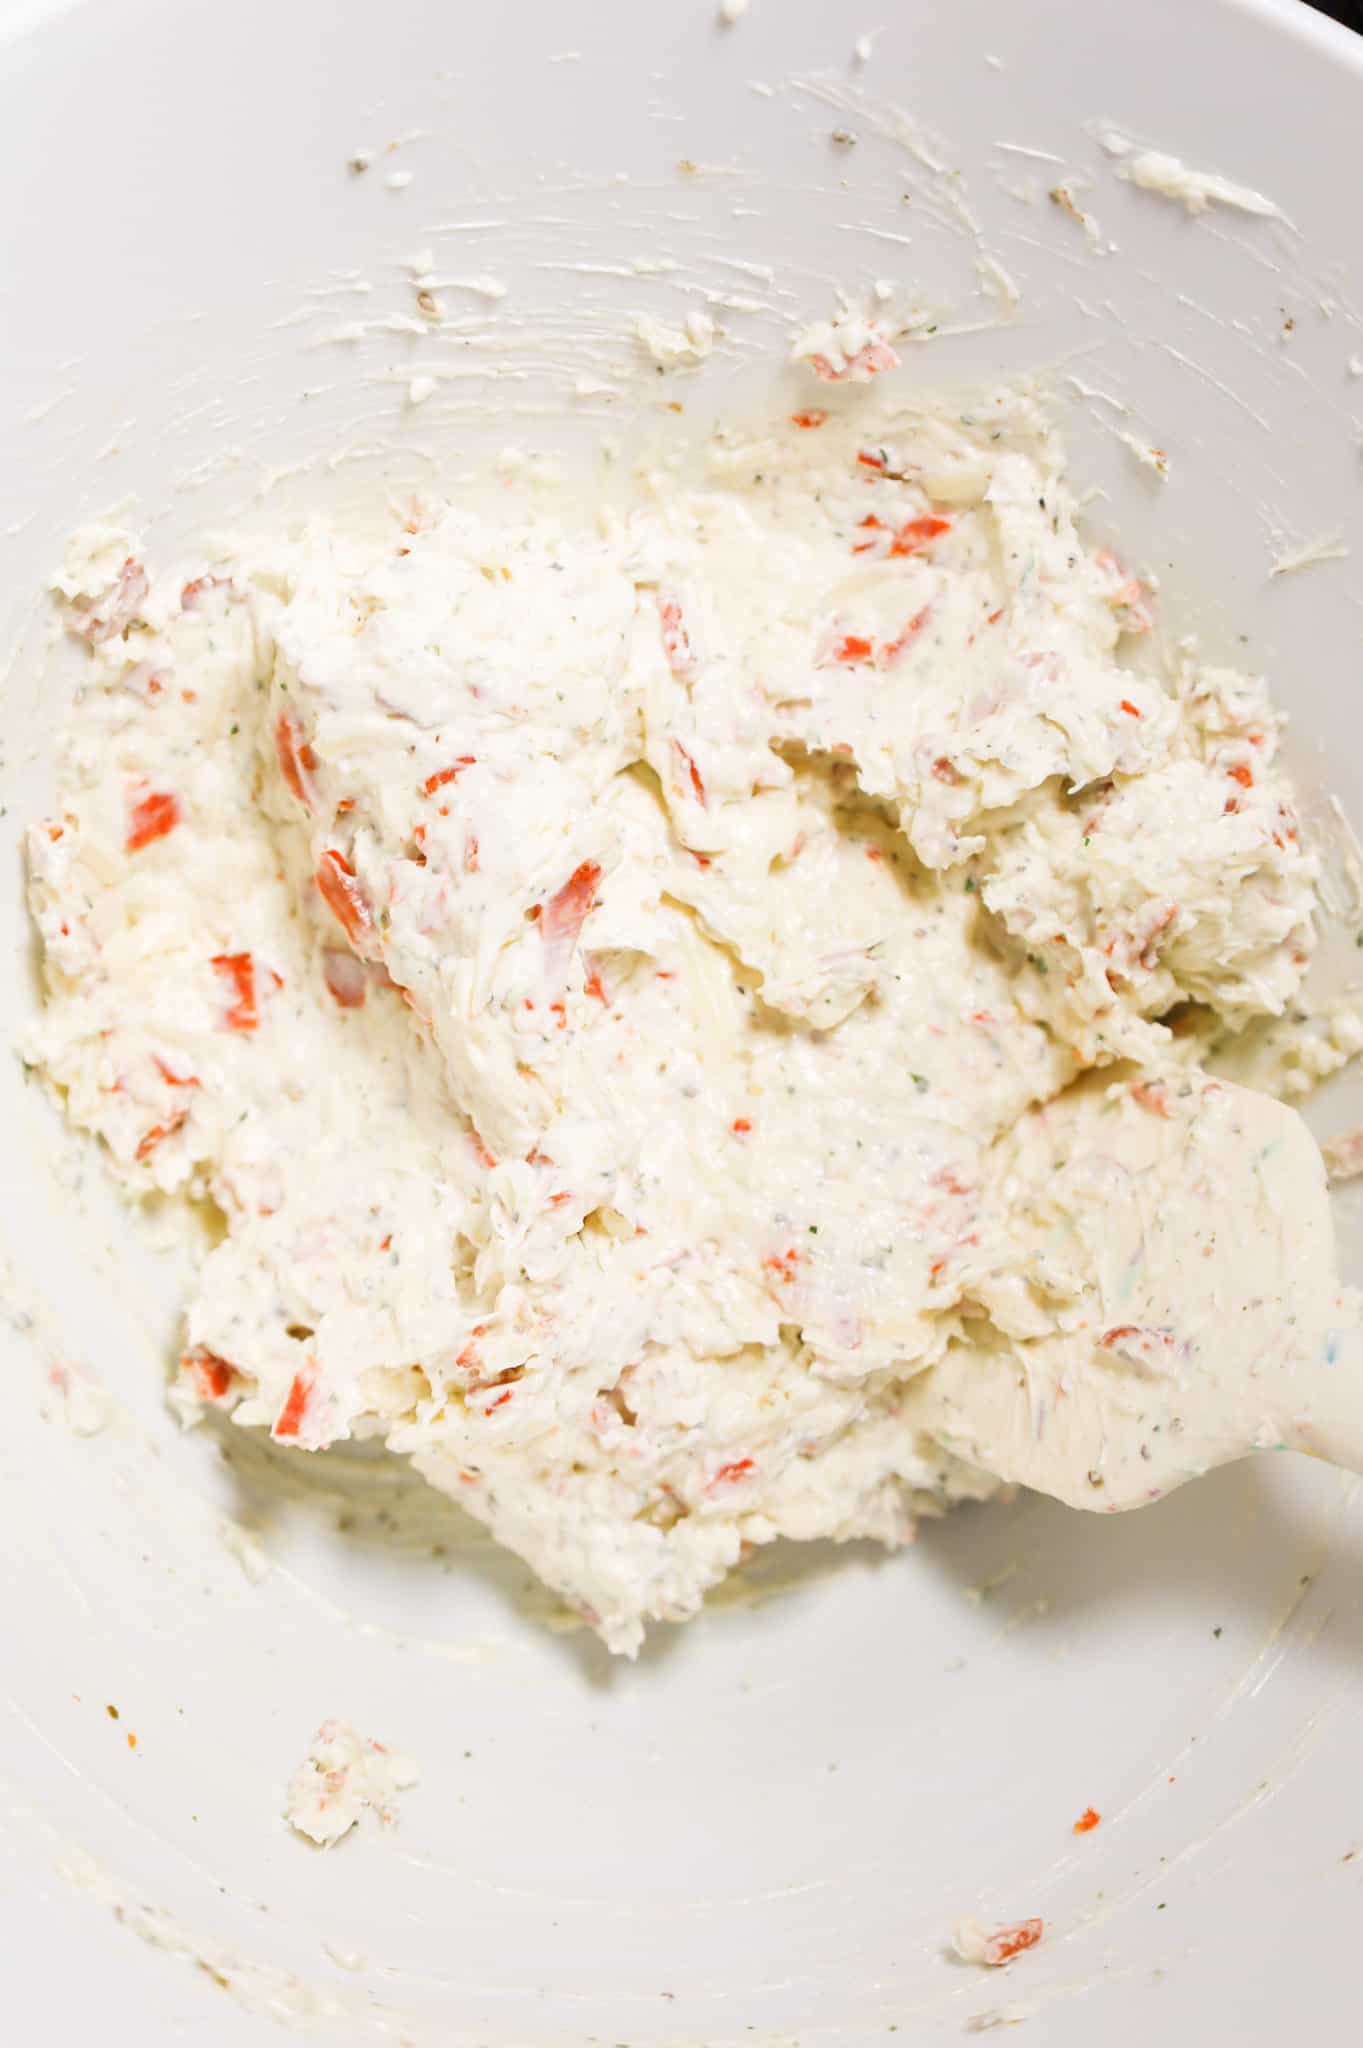 cream cheese, ranch dressing, shredded cheese and pepperoni mixture in a mixing bowl